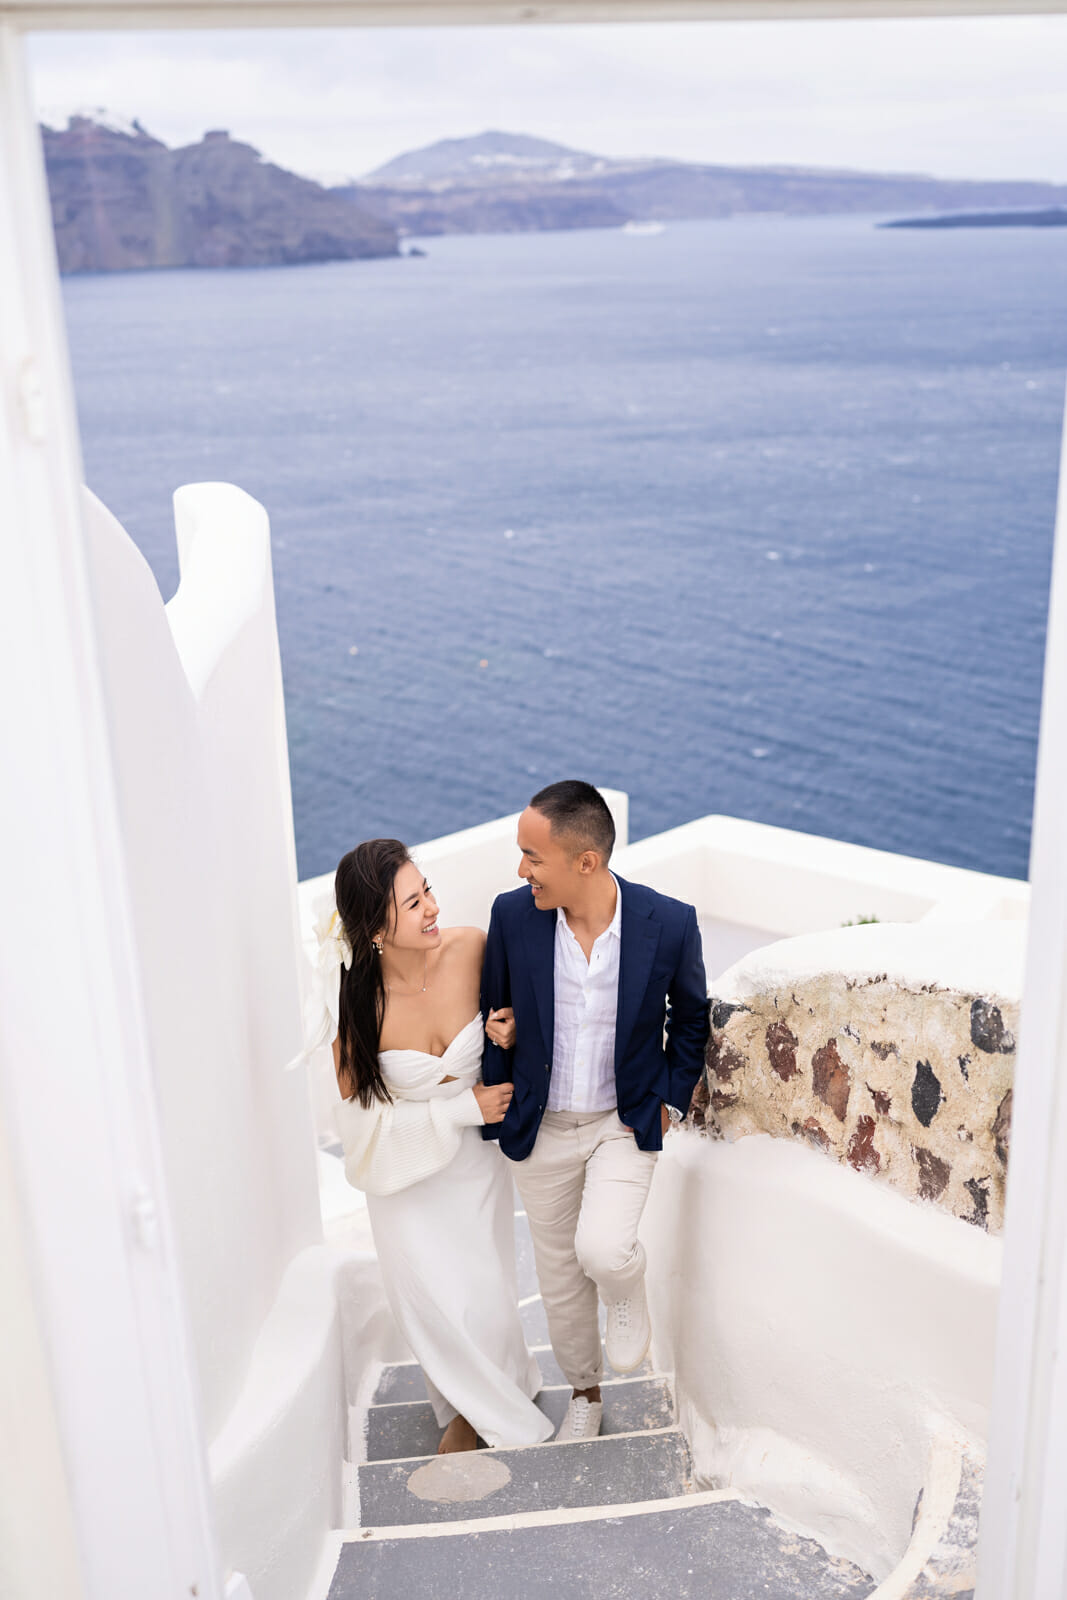 Stunning Santorini photos in a private hotel